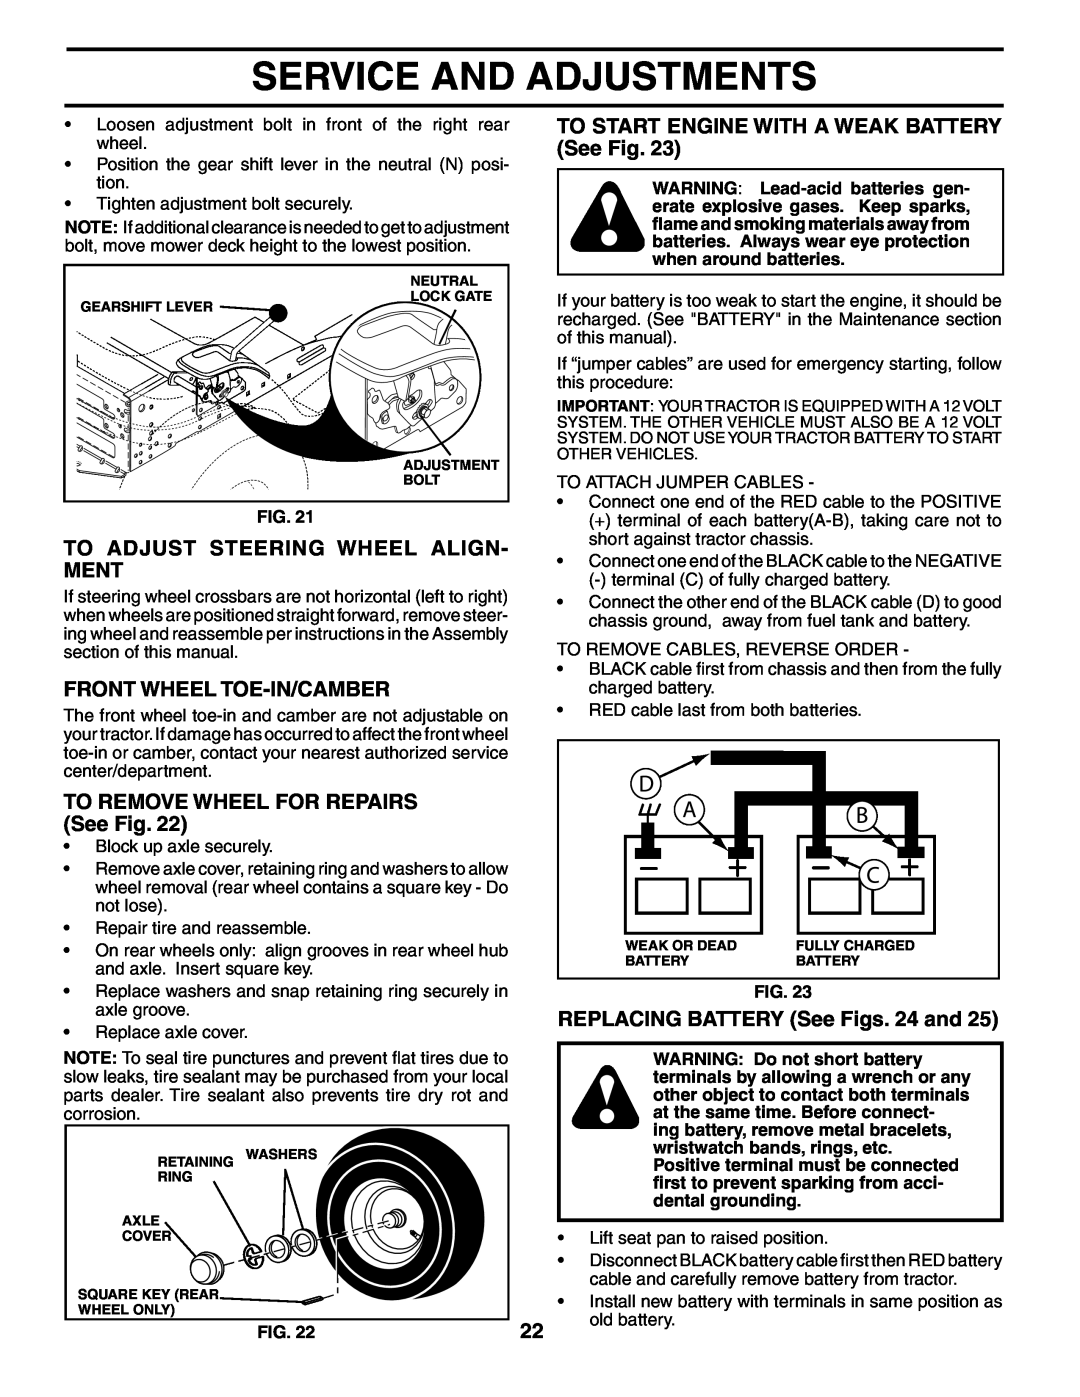 Poulan 194632 manual To Adjust Steering Wheel Align- Ment, Front Wheel Toe-In/Camber, TO REMOVE WHEEL FOR REPAIRS See Fig 